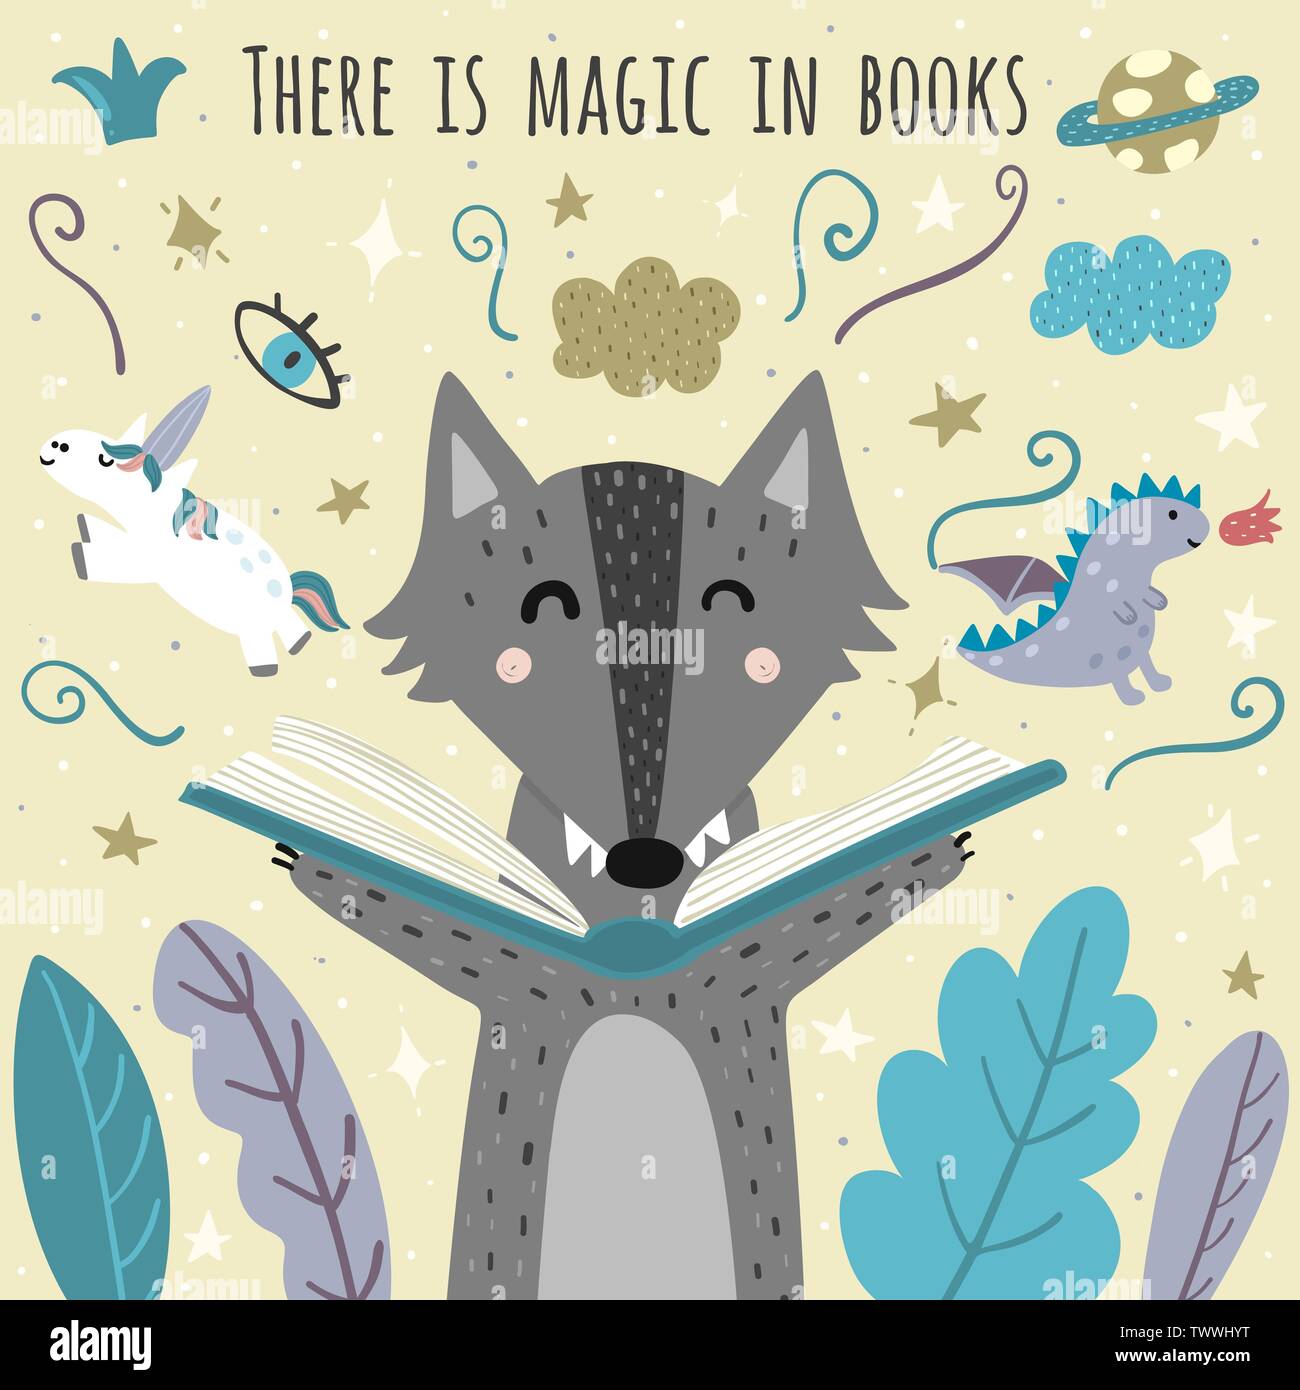 There is magic in books awesome card with cute wolf. Fantasy creatures flying out of an open book. Vector illustration Stock Vector